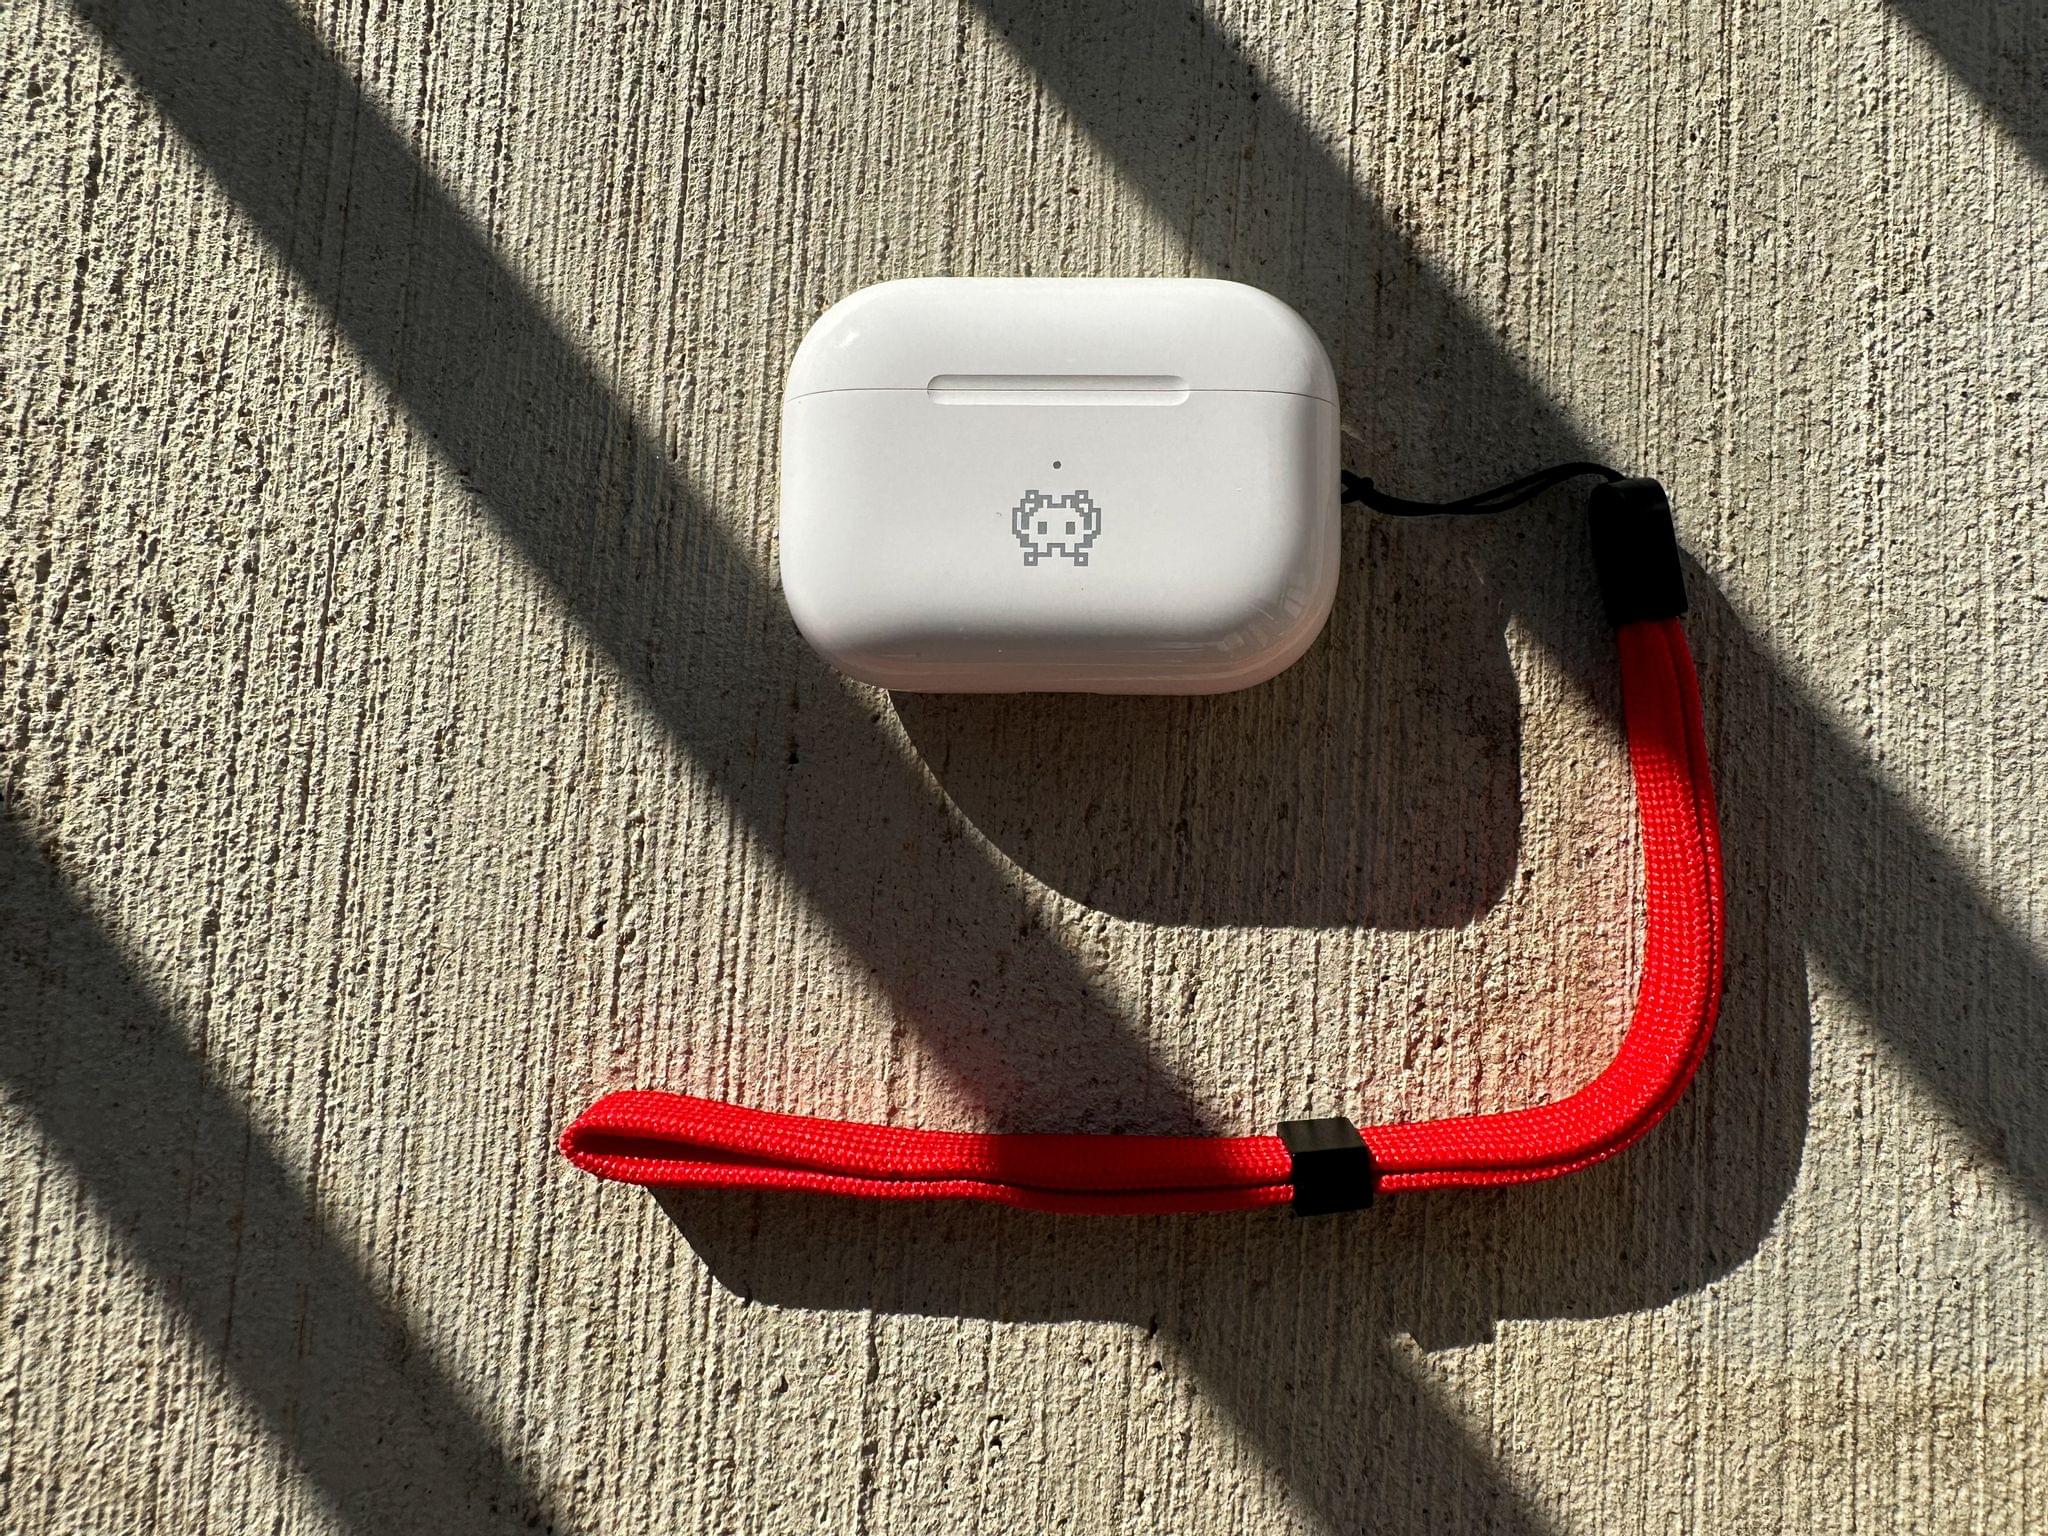 Hands-On with the Second-Generation AirPods Pro